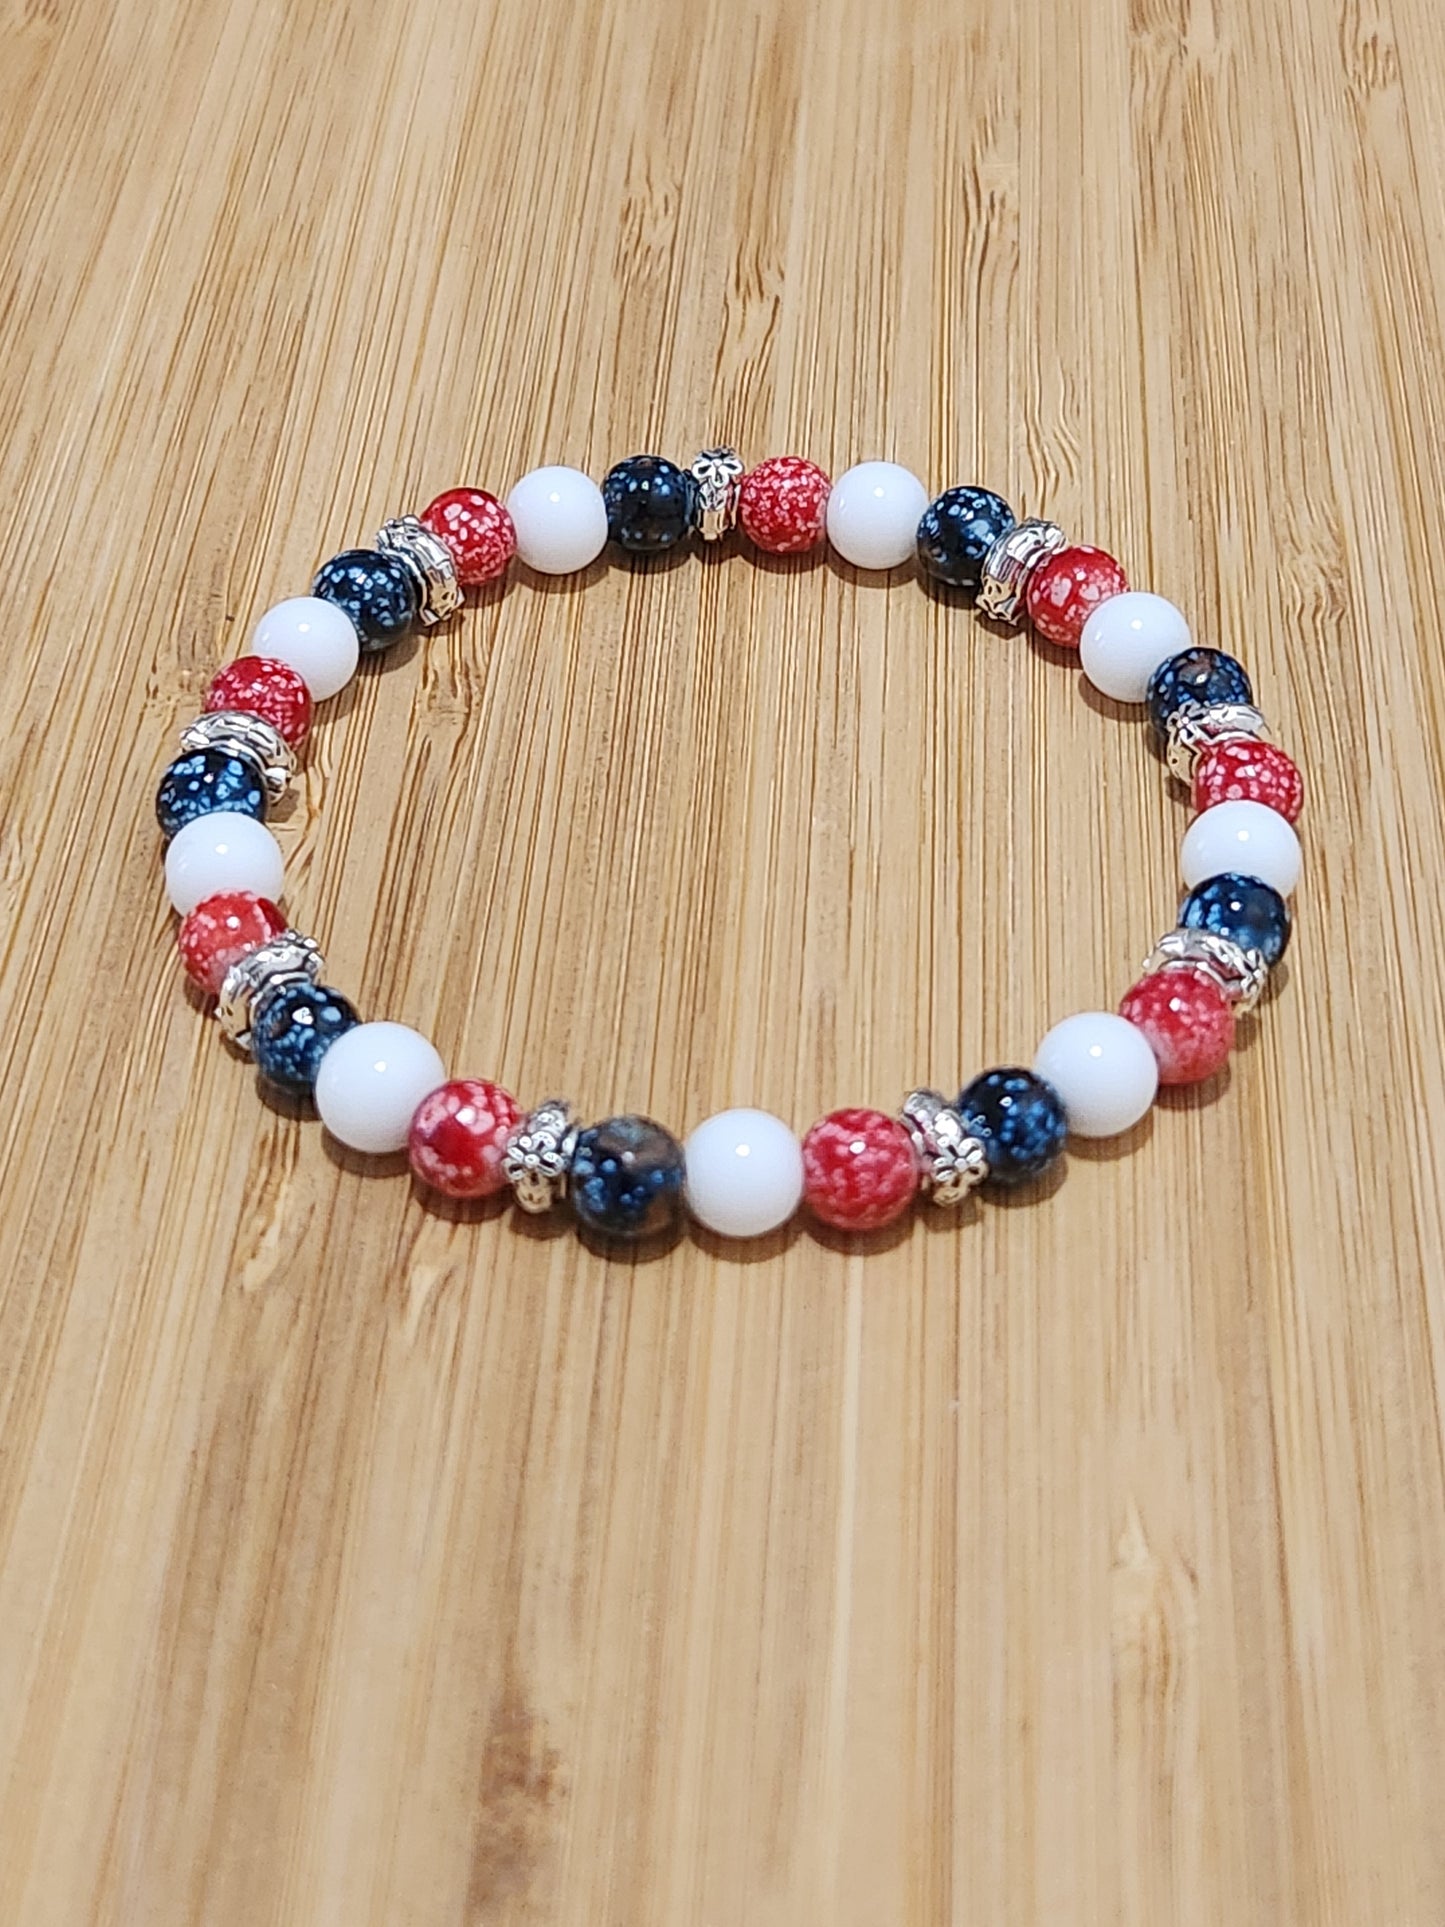 Patriotic Bracelets - set of 3 - red, white and blue - Memorial Day - 4th of July - Veterans Day - The New Year